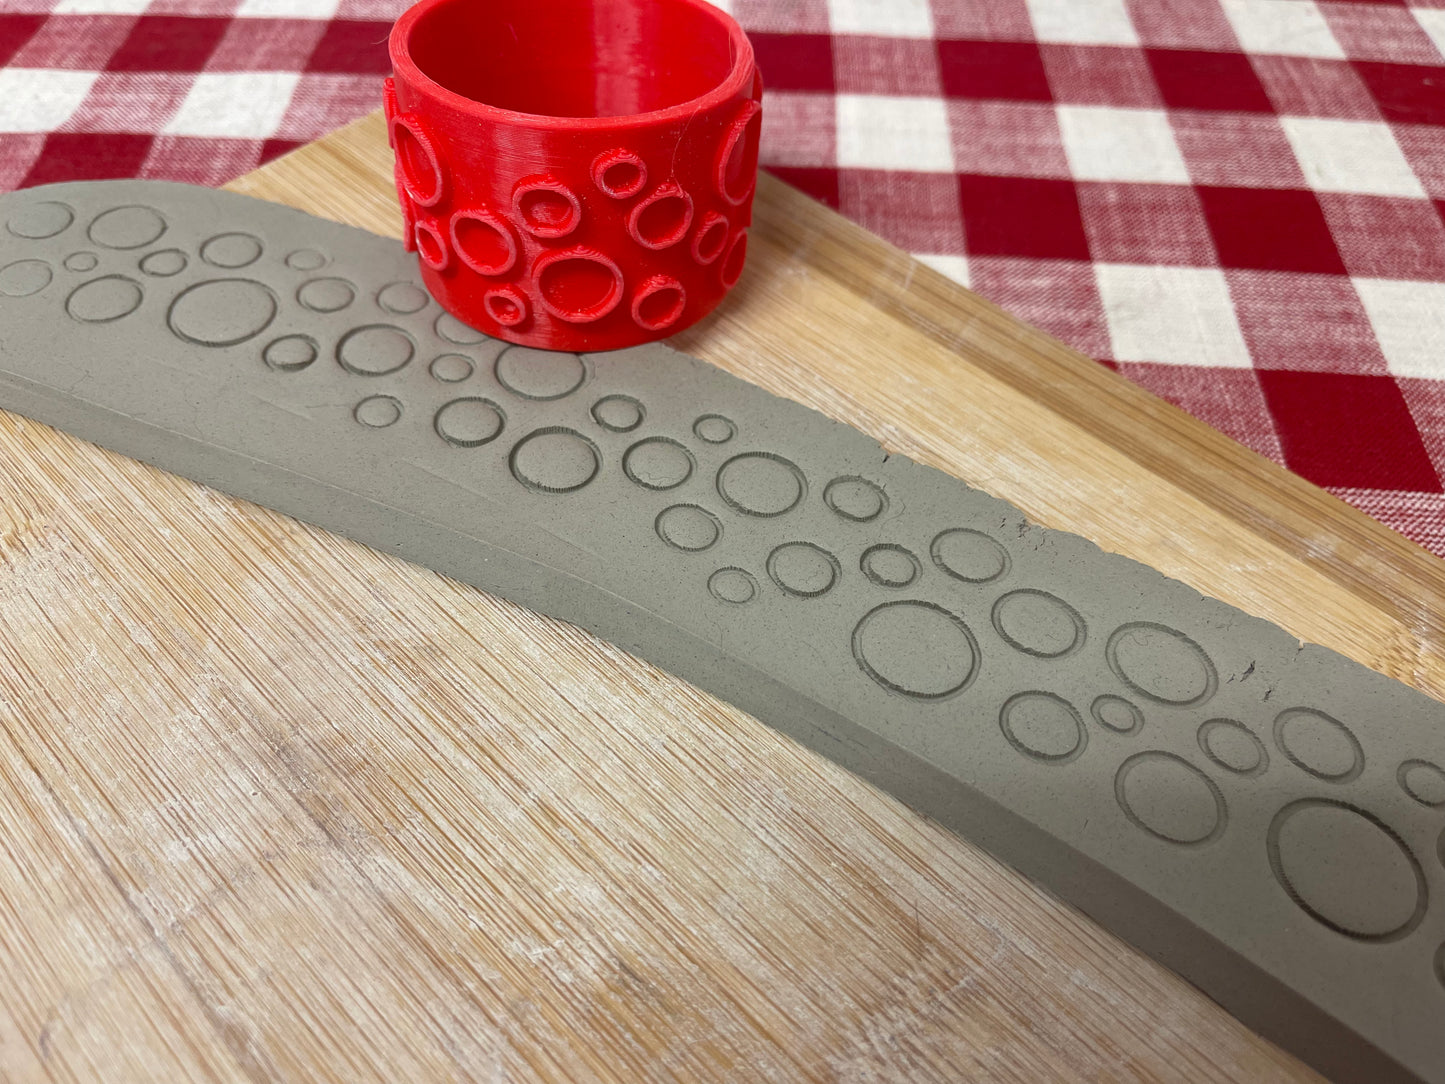 Dots Pottery Roller - Border Stamp, Dots, circles, bubbles, Repeating pattern, plastic 3D printed